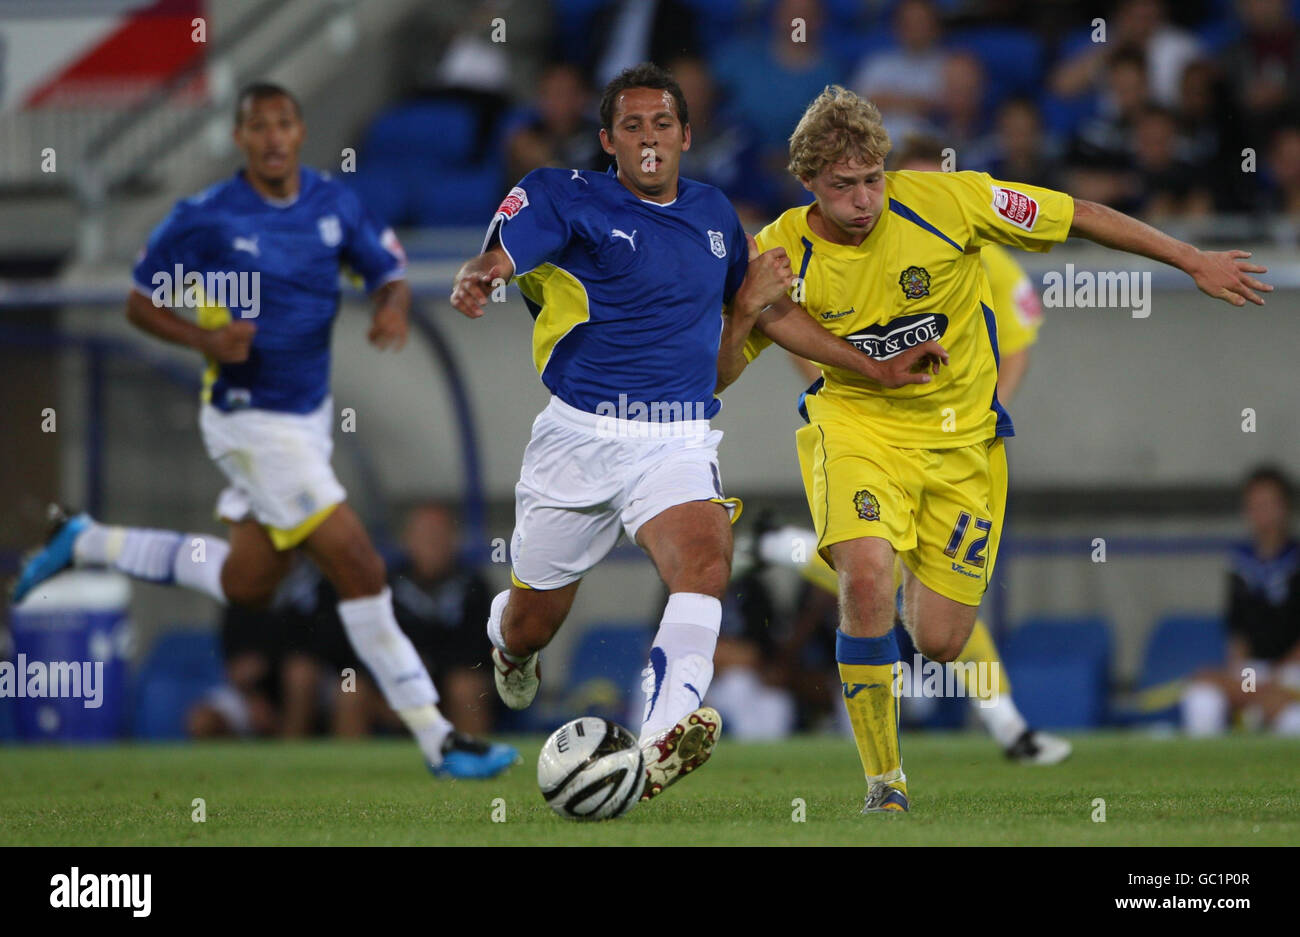 Cardiff City's Michael Chopra holds off Dagenham and Redbridge's Scott Griffiths (right) during the Carling Cup First Round match at the Cardiff City Stadium, Cardiff. Stock Photo